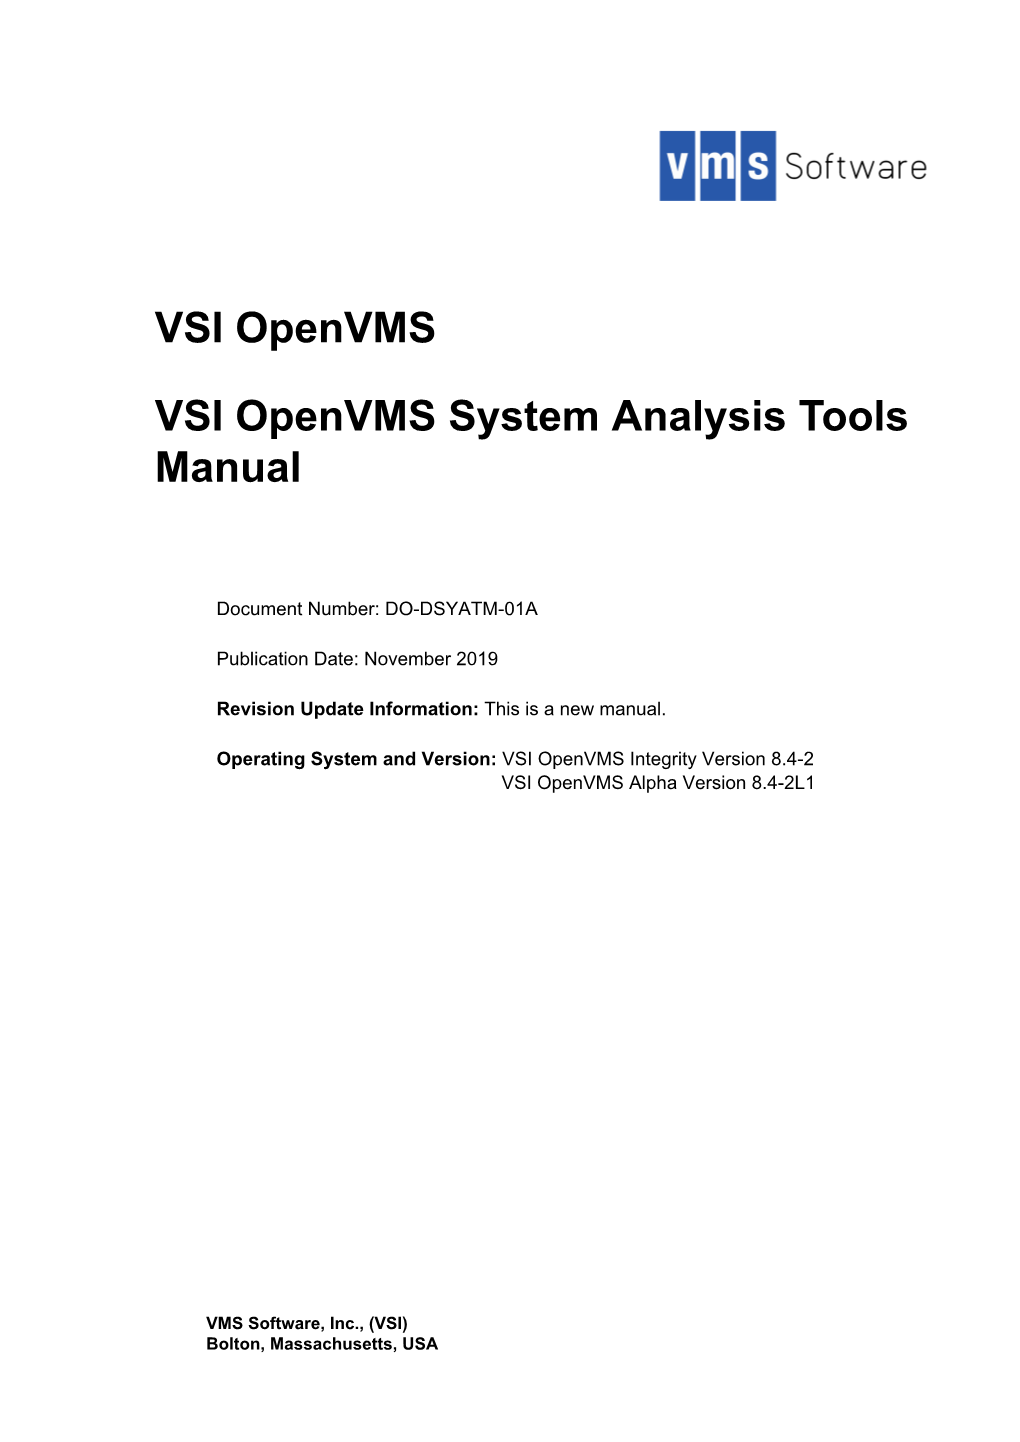 VSI Openvms System Analysis Tools Manual